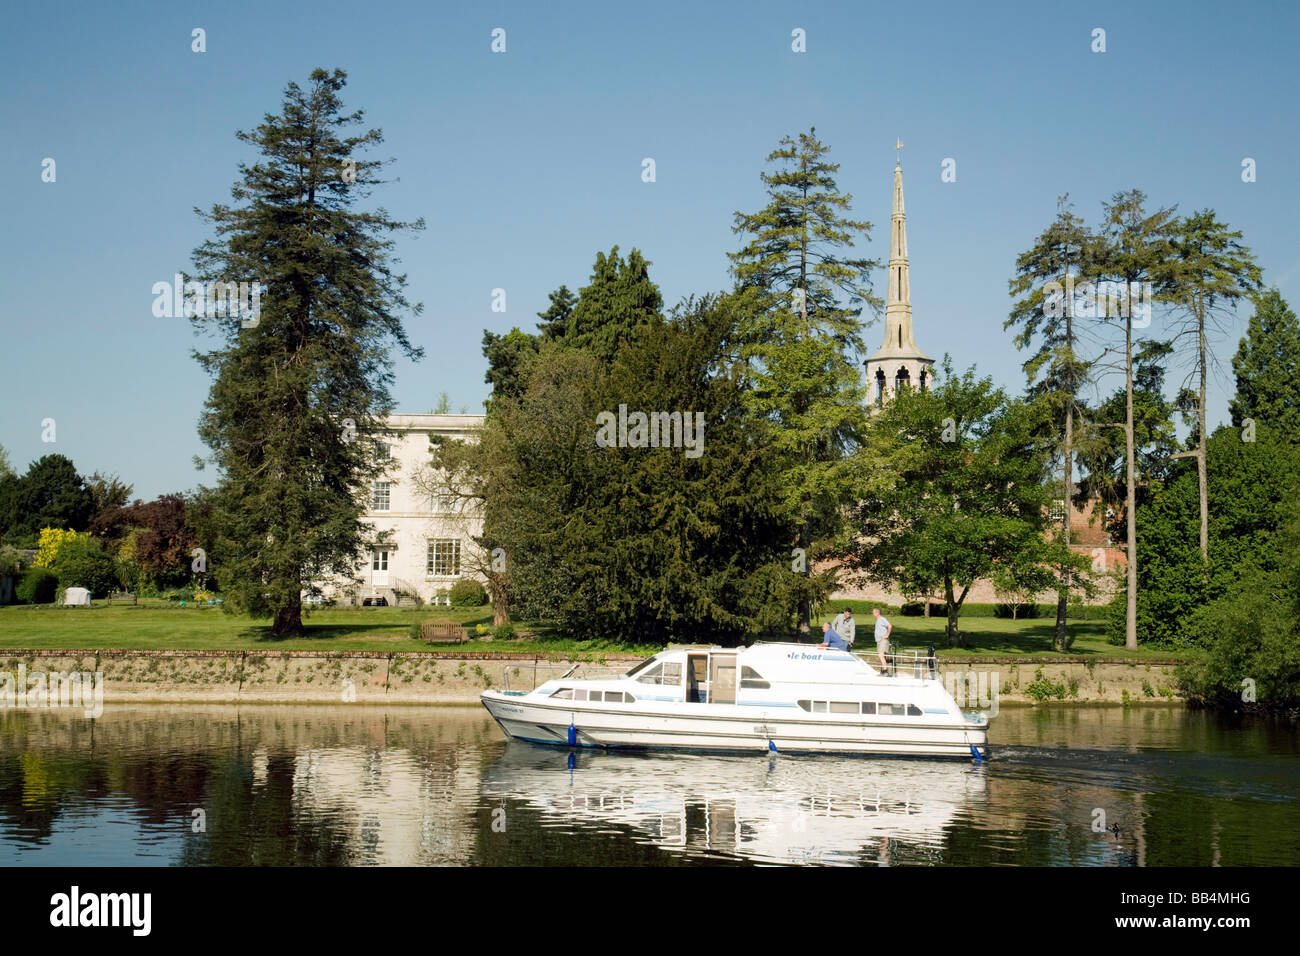 A boat on the river Thames at Wallingford, Oxfordshire, UK Stock Photo